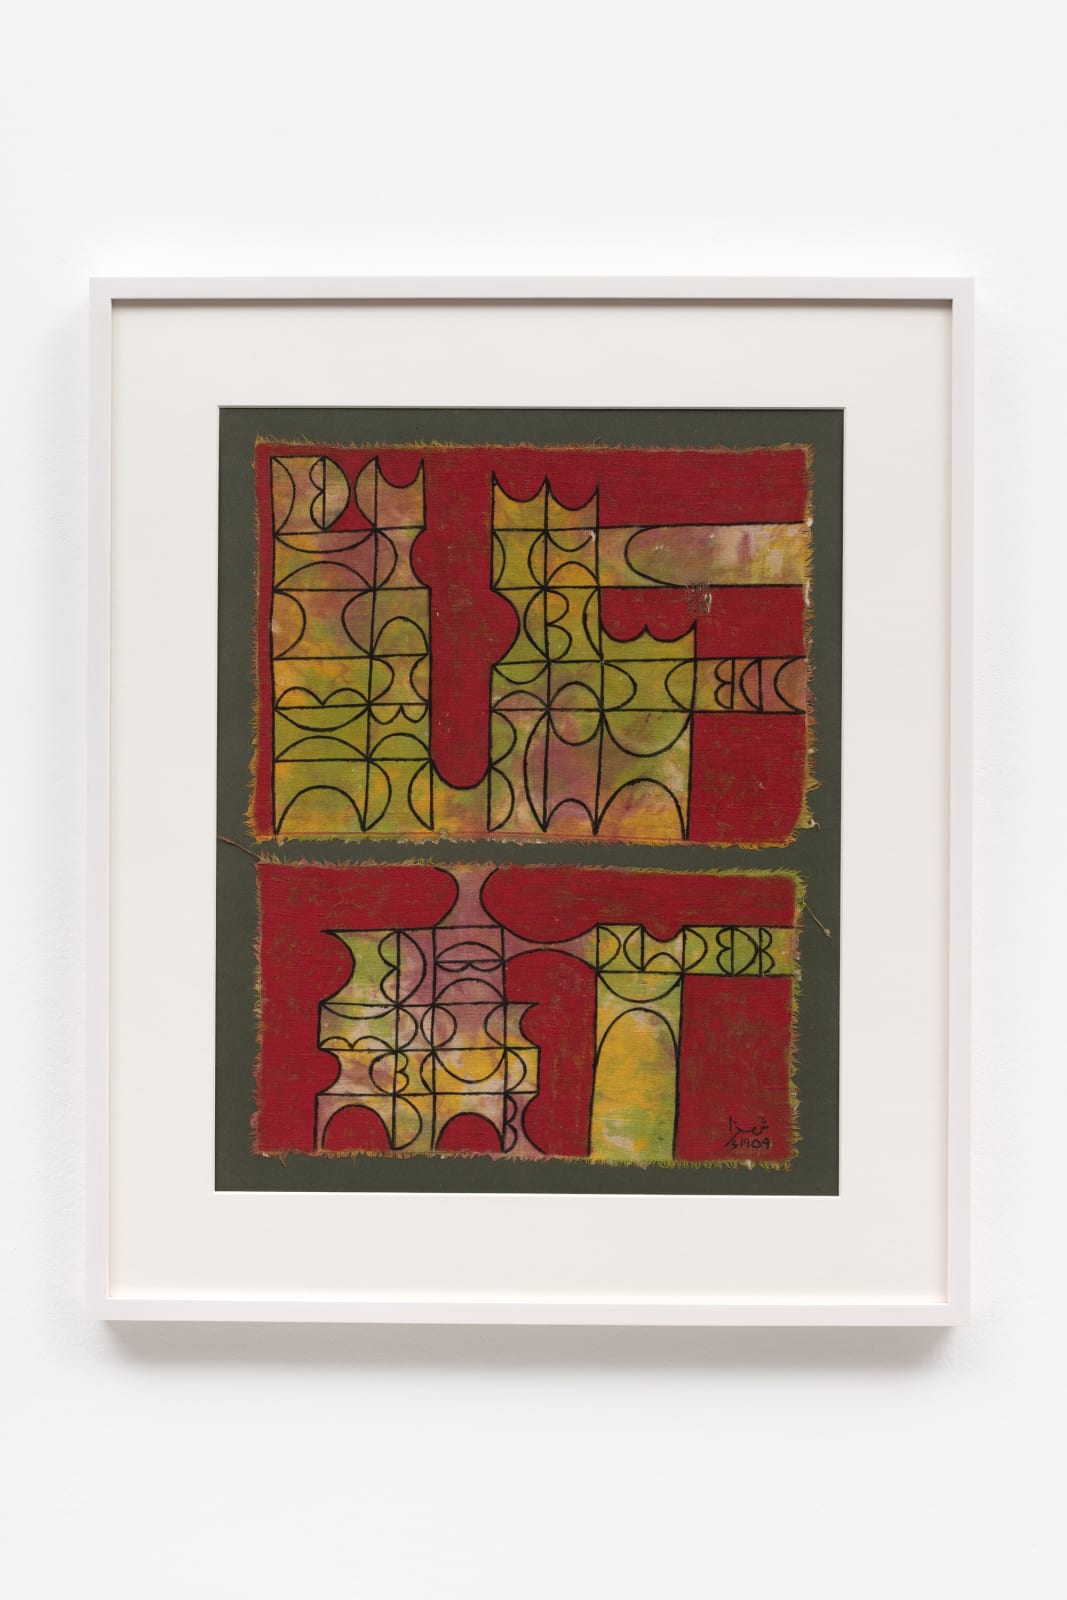 Anwar Jalal Shemza, Composition in Lime Green on a Crimson Background, 1959